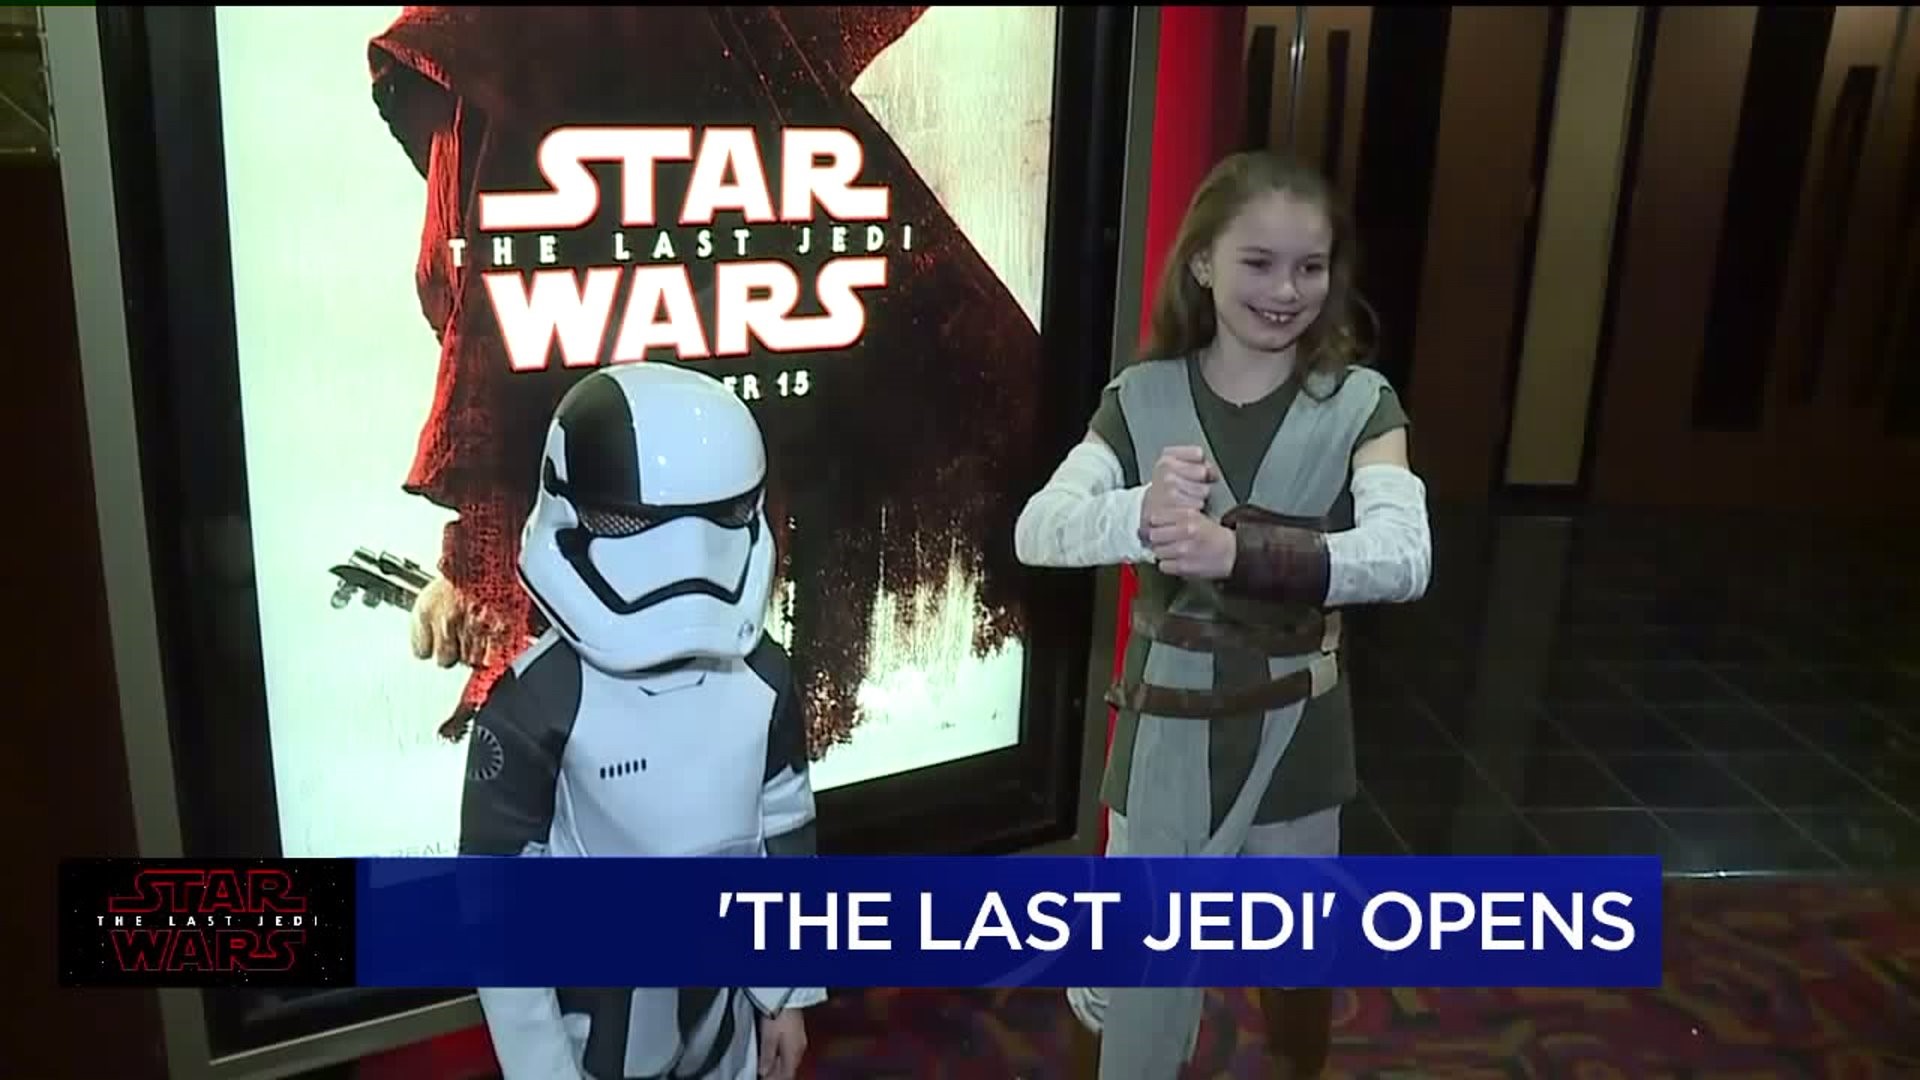 Star Wars Fans Out In Full "Force" For Premier Of "The Last Jedi"